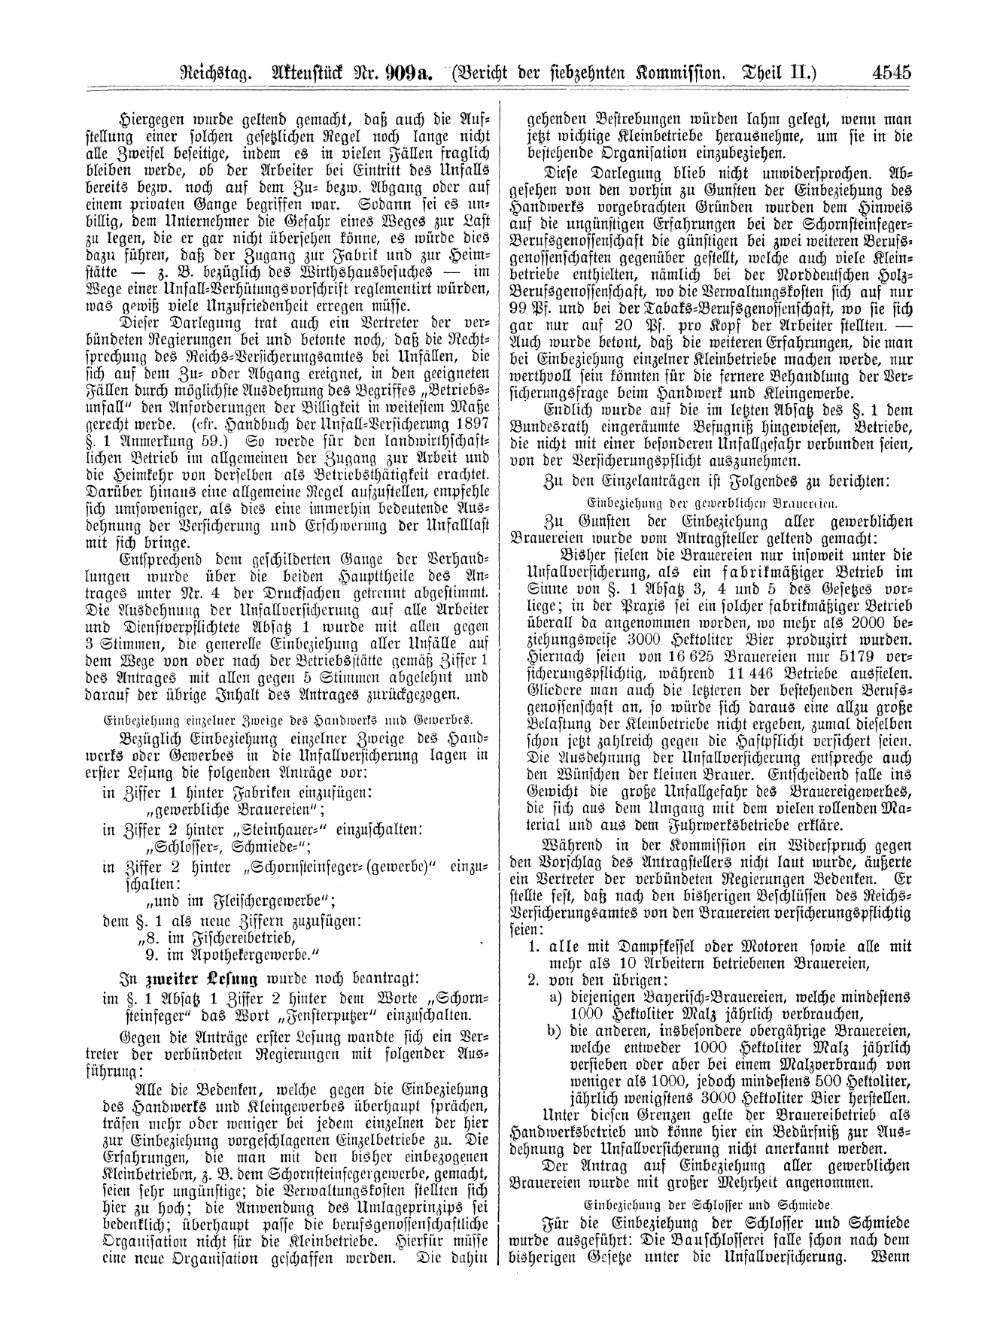 Scan of page 4545